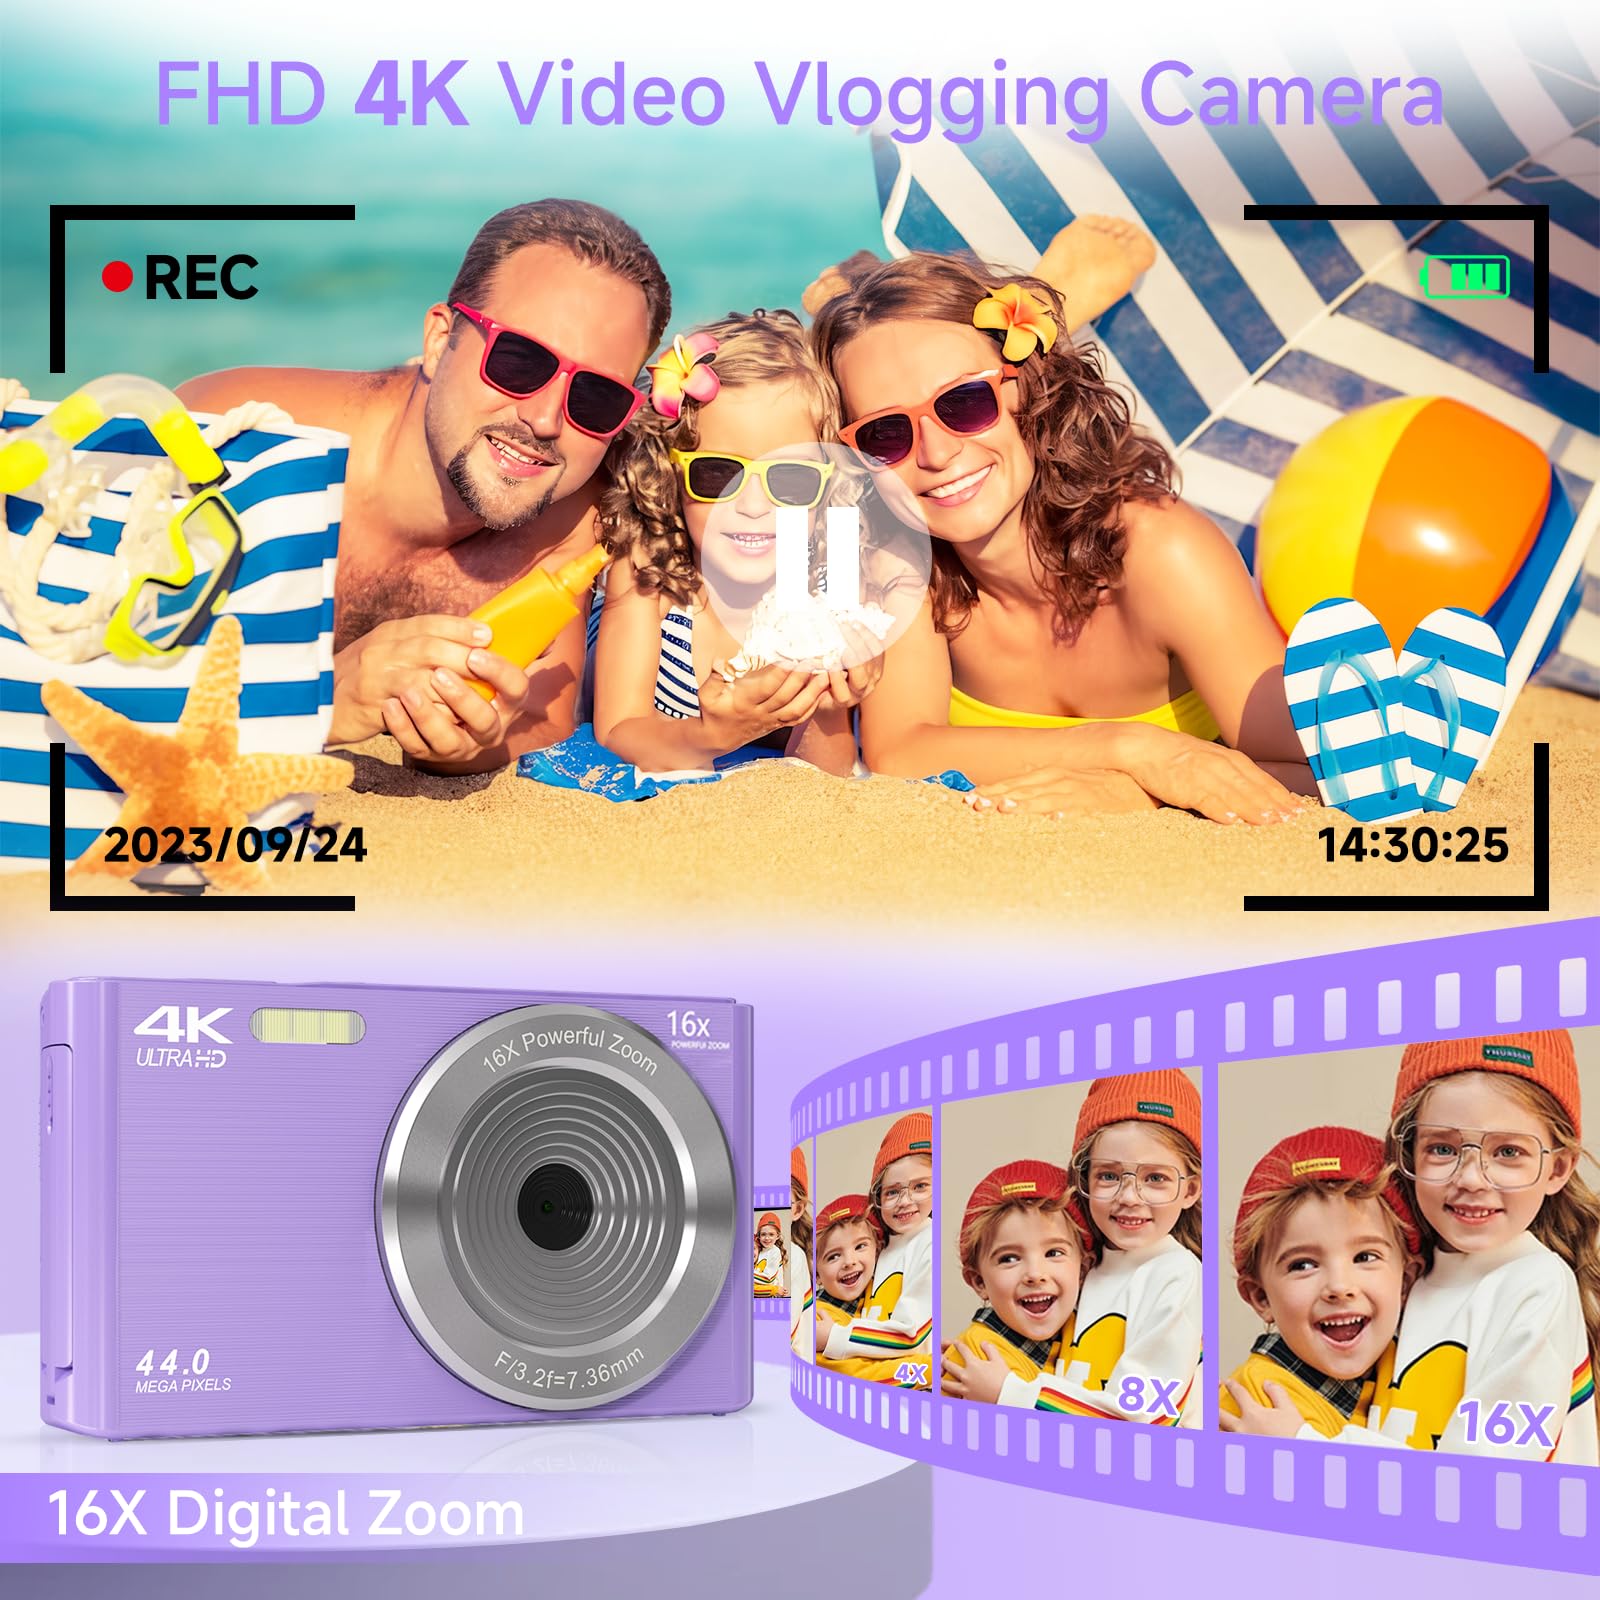 Digital Camera for Teens, FHD 4K 44MP Digital Camera Purple with 64GB SD Card 16X Digital Zoom, Cameras for Photography Compact Point and Shoot Camera for Teen Boys Girls Kids Camera Digital